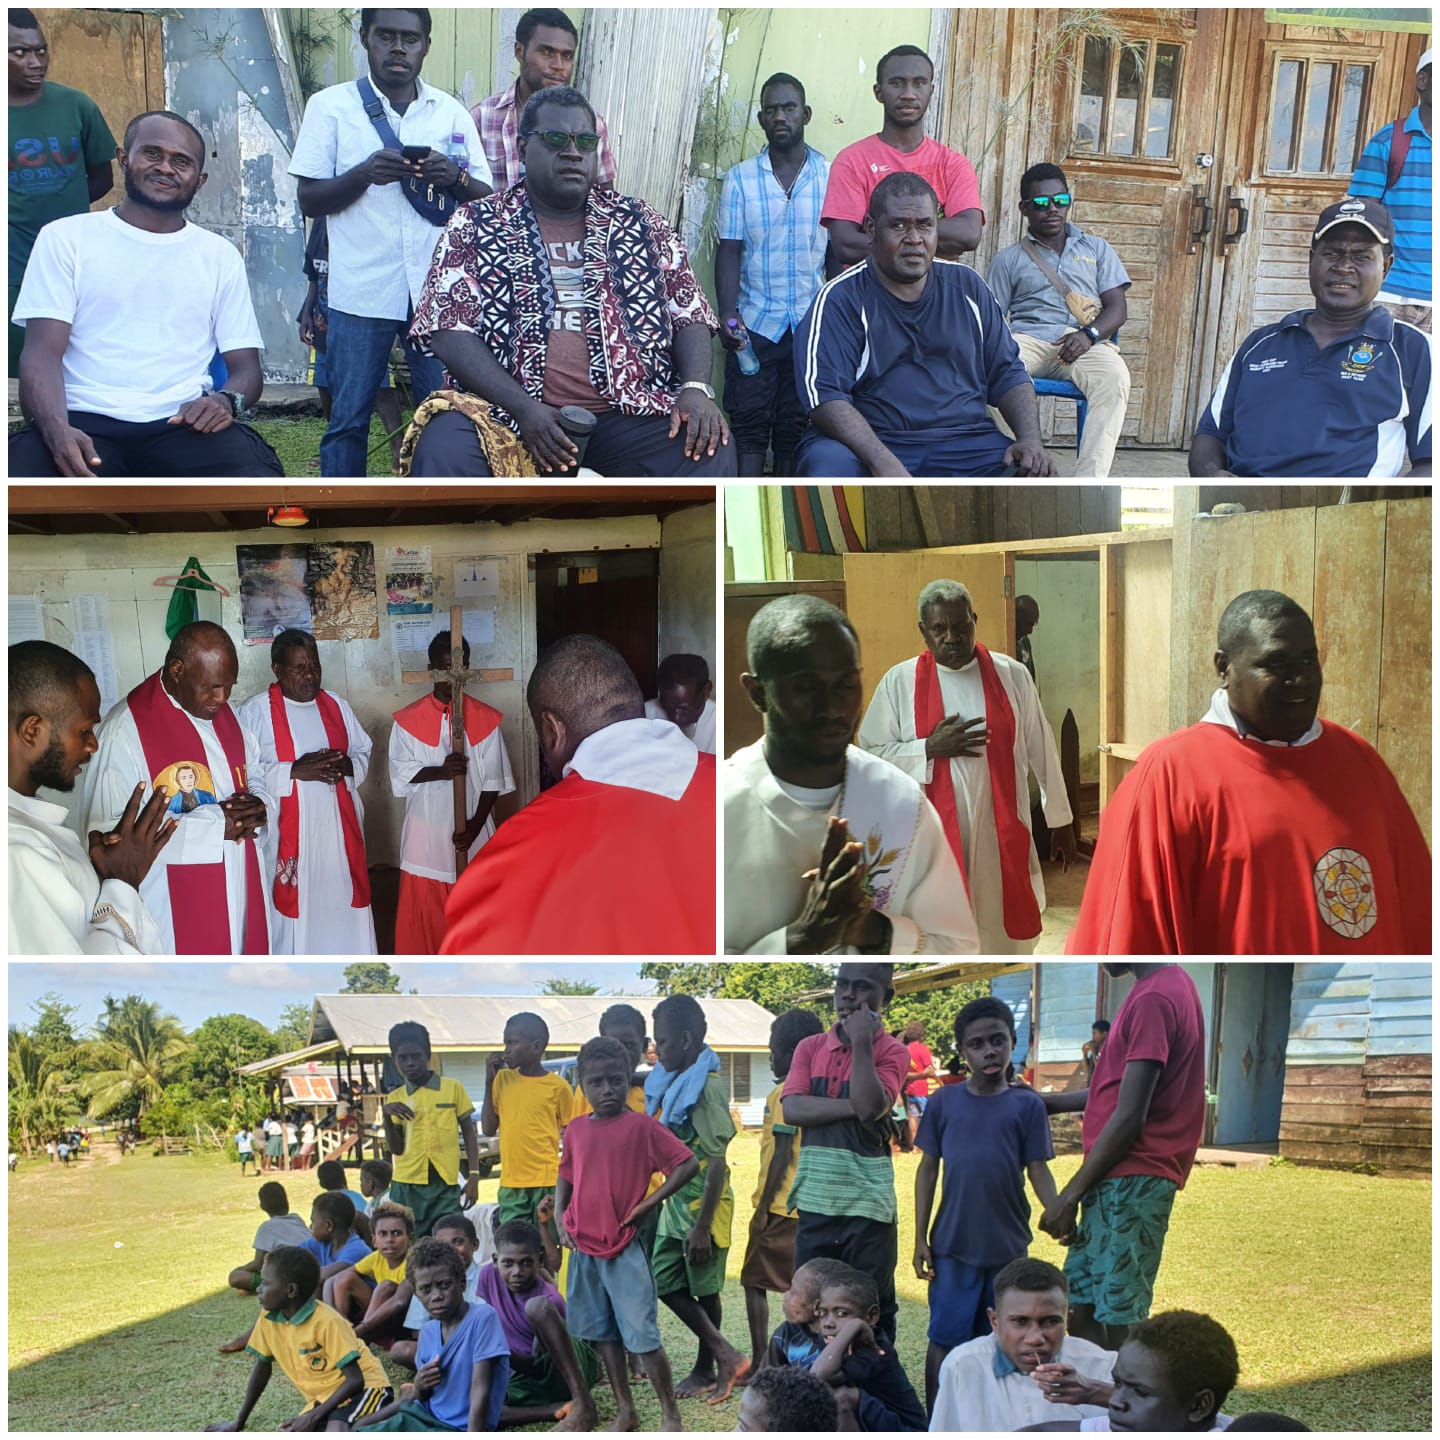 Feast of St Peter Chanel Bougainville